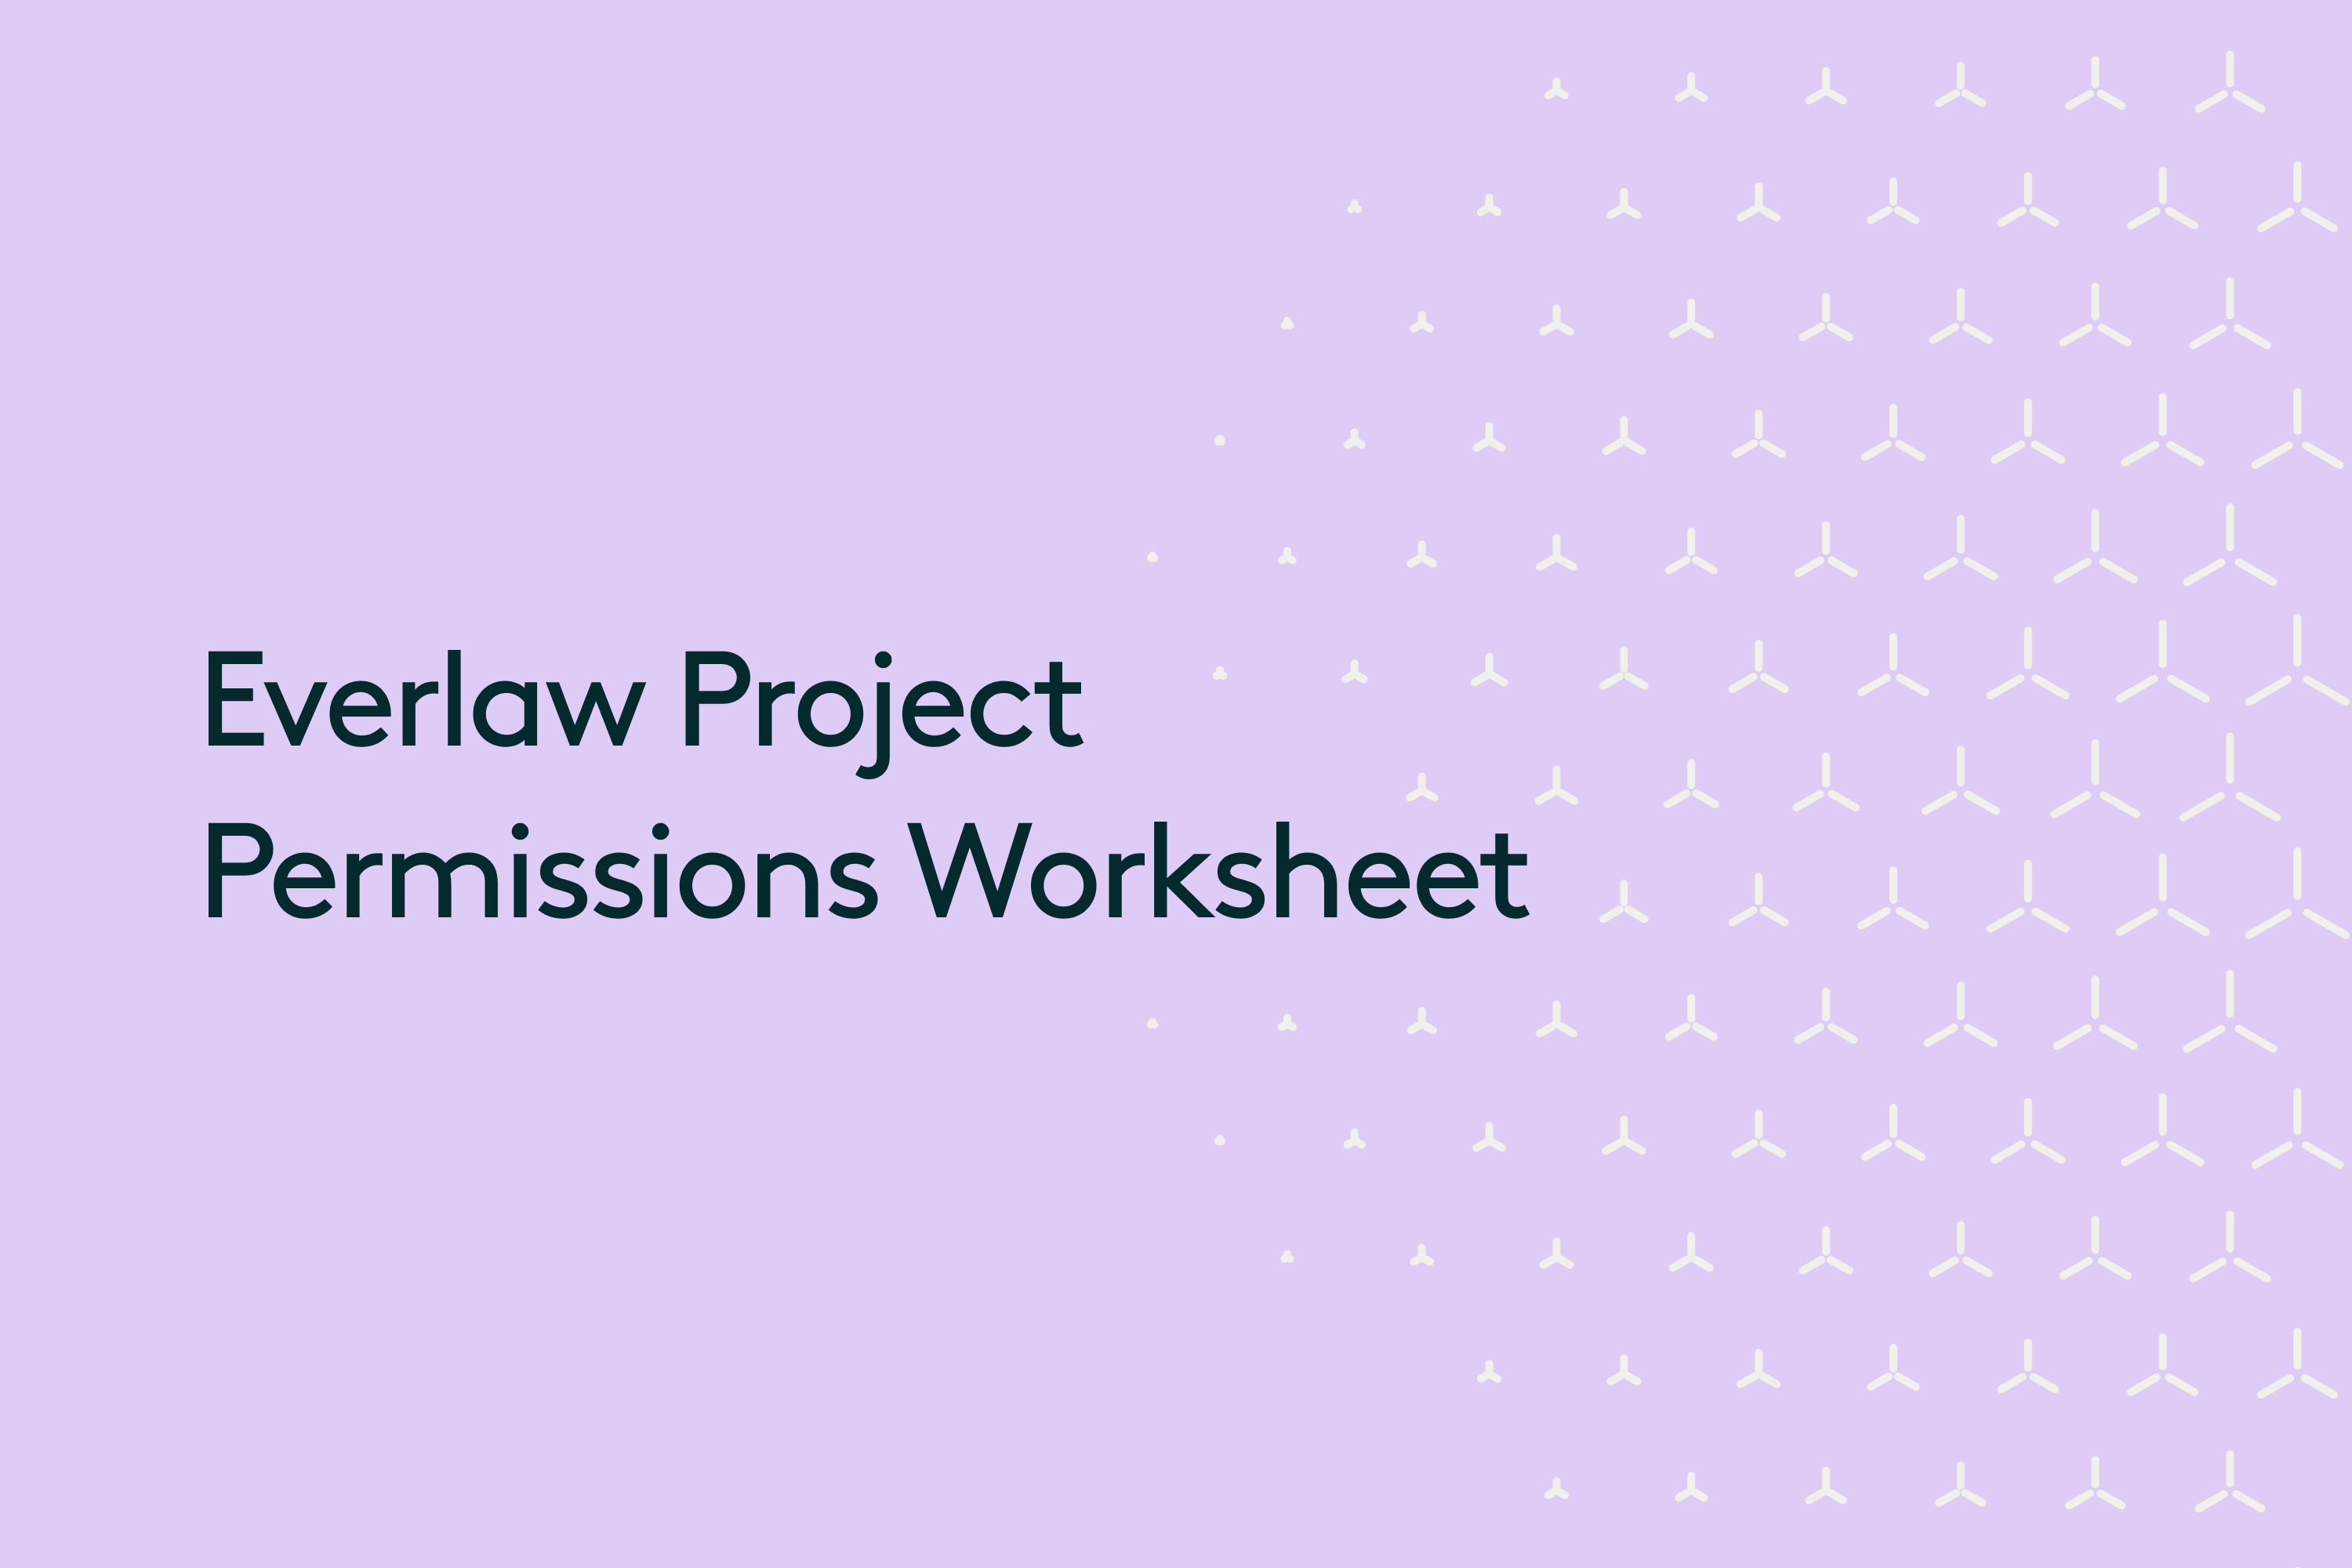 Everlaw Project Permissions Worksheet